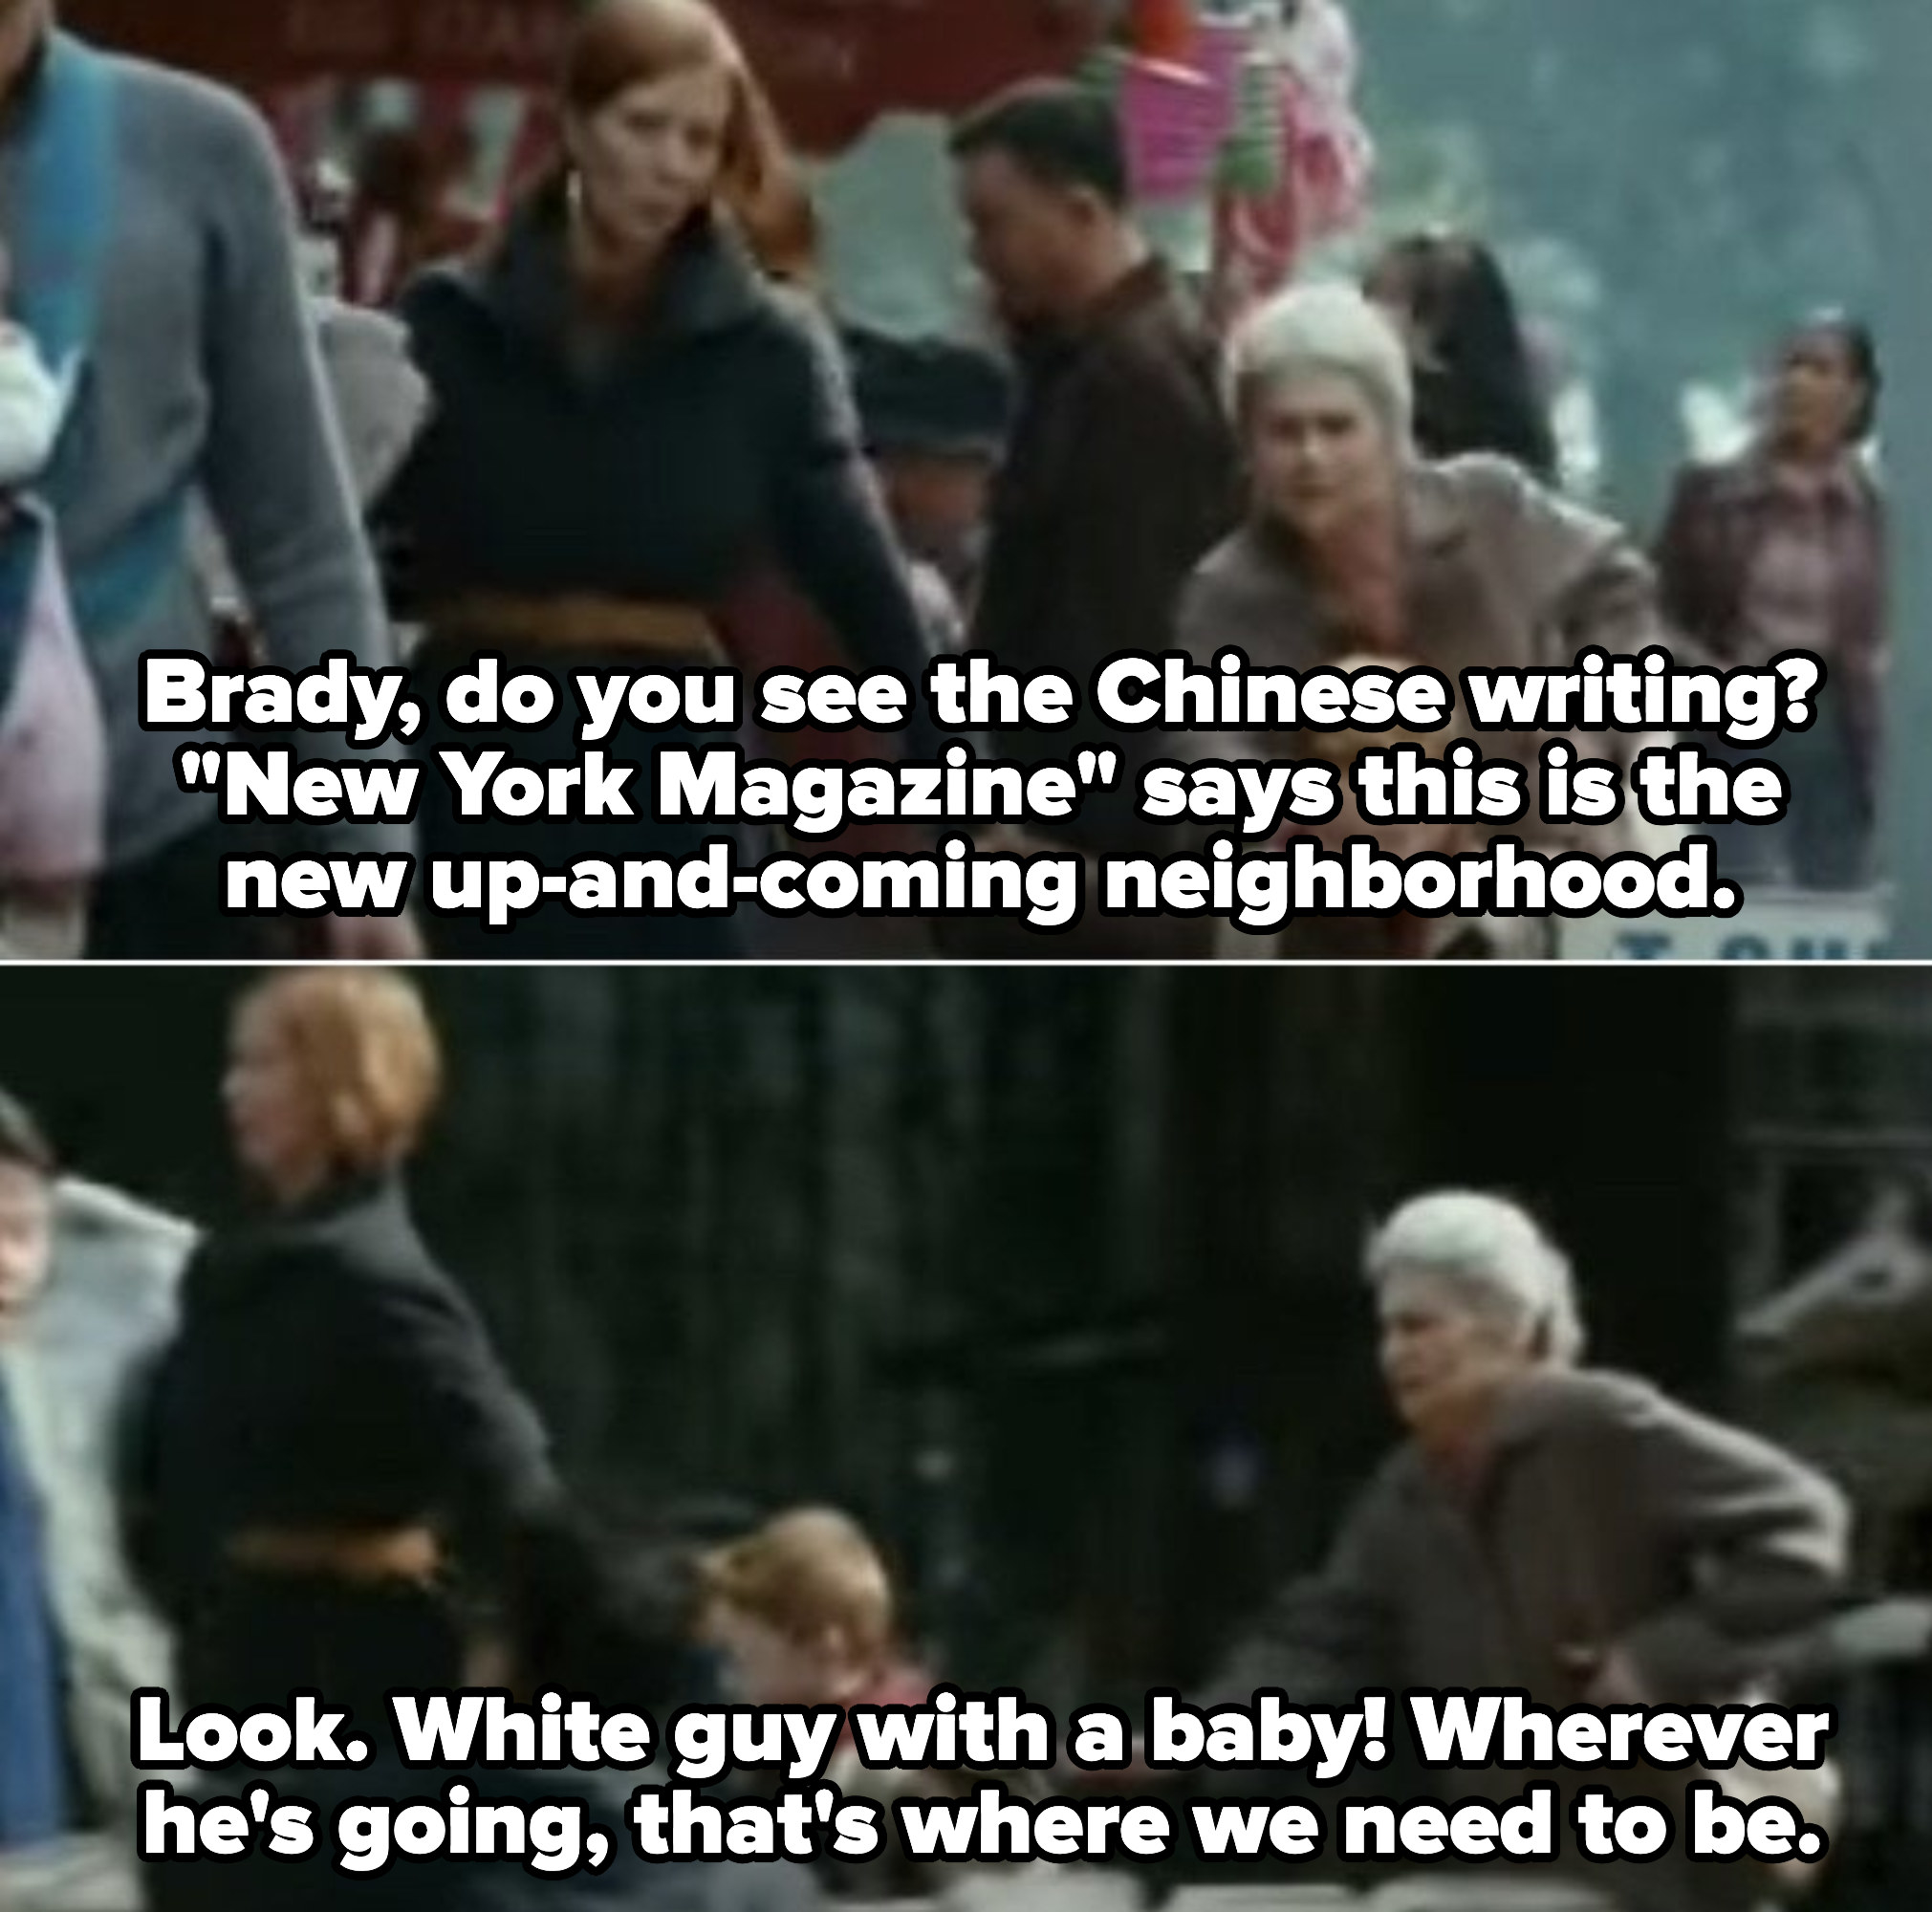 Miranda telling Brady: &quot;Look: White guy with a baby! Wherever he&#x27;s going, that&#x27;s where we need to be&quot;